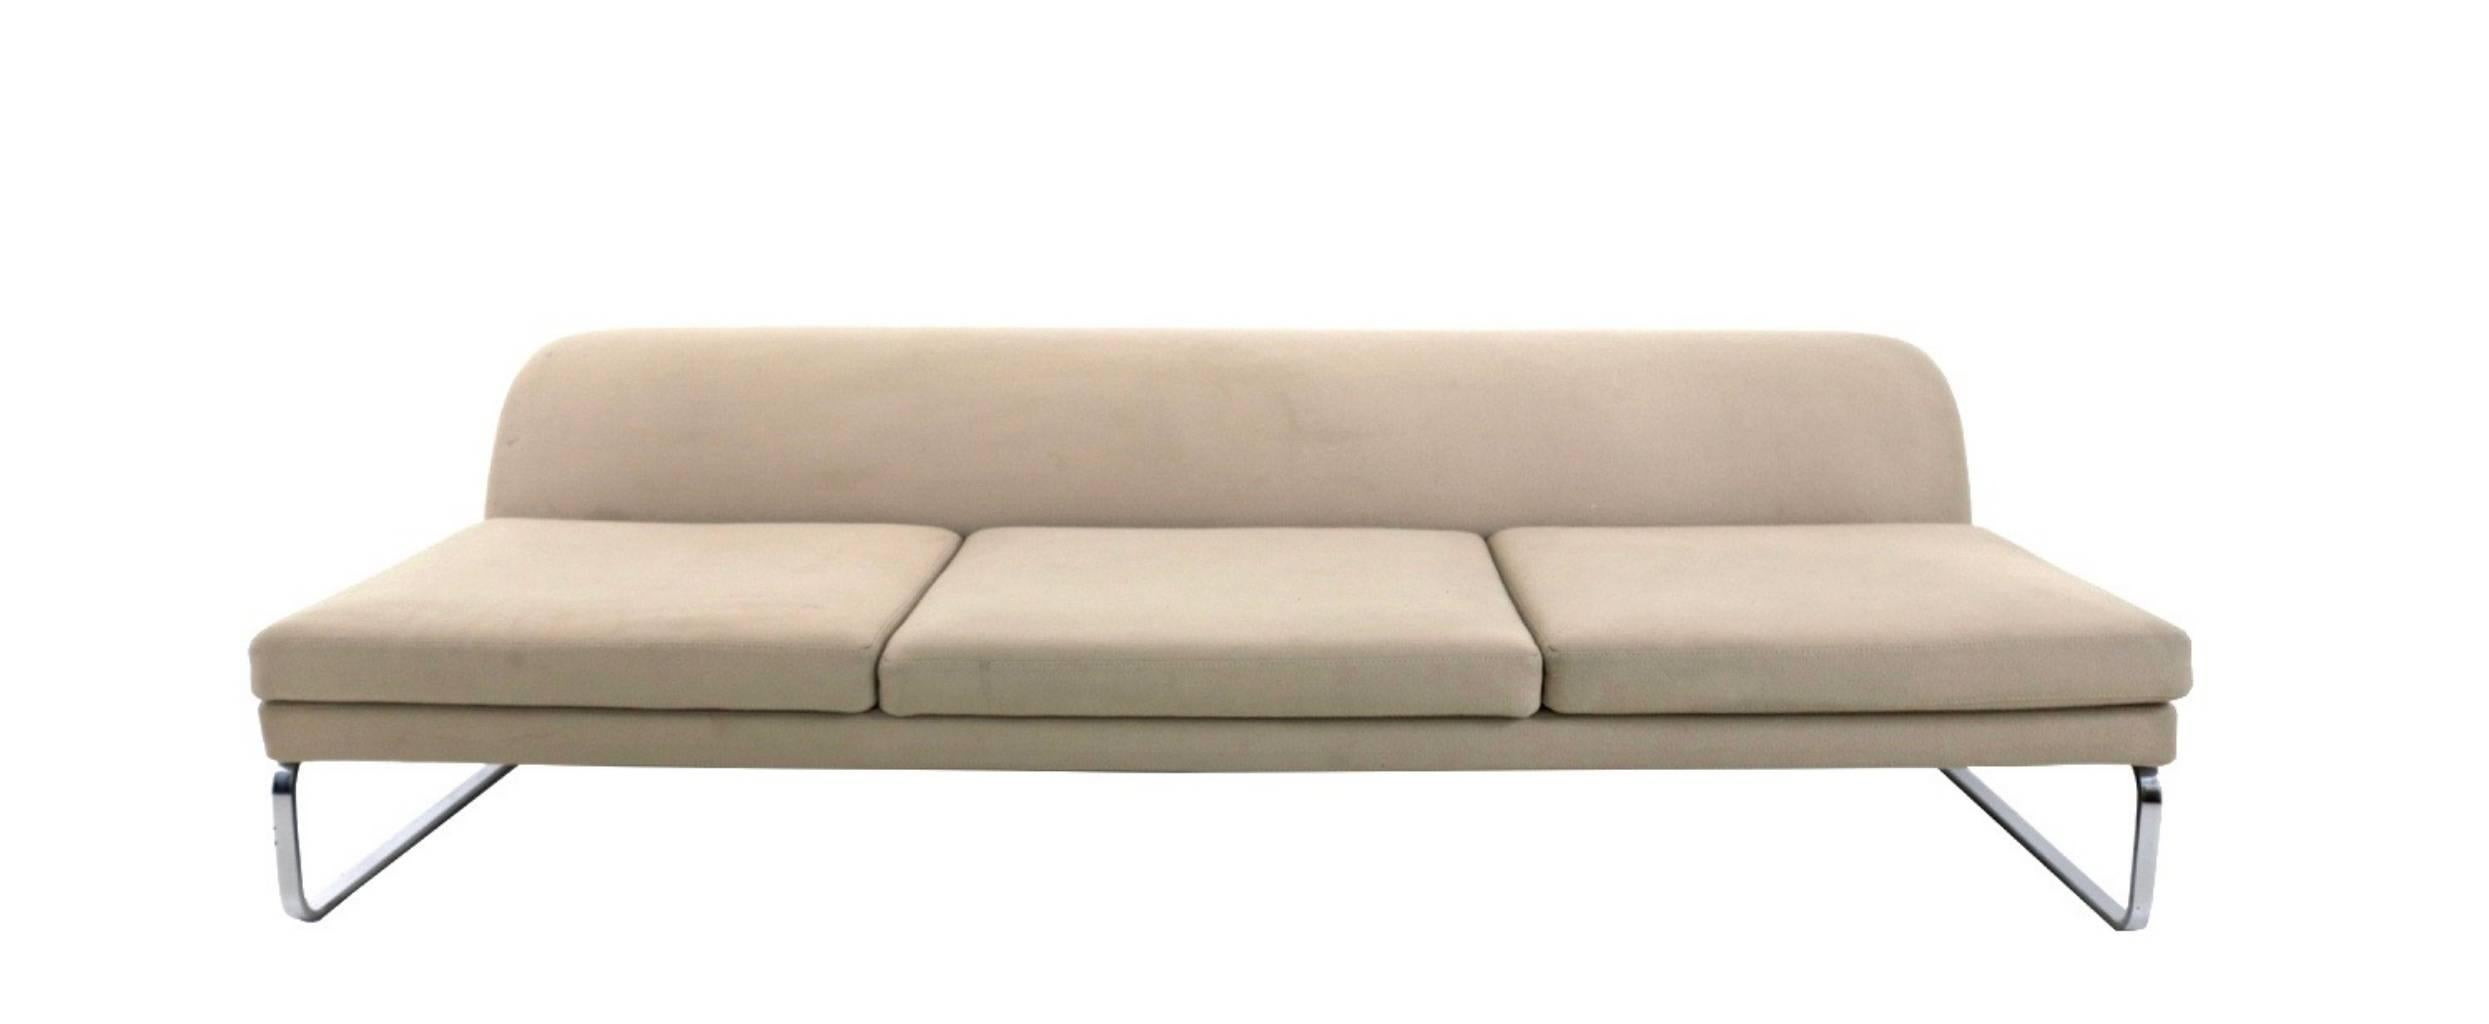 It features a very solid metal structure and padding upholstered in fabric by Tacchini.
It is in good original condition, but may show traces of use.

Measures: 
Width 212 cm
Height 60 cm
Depth 97 cm.